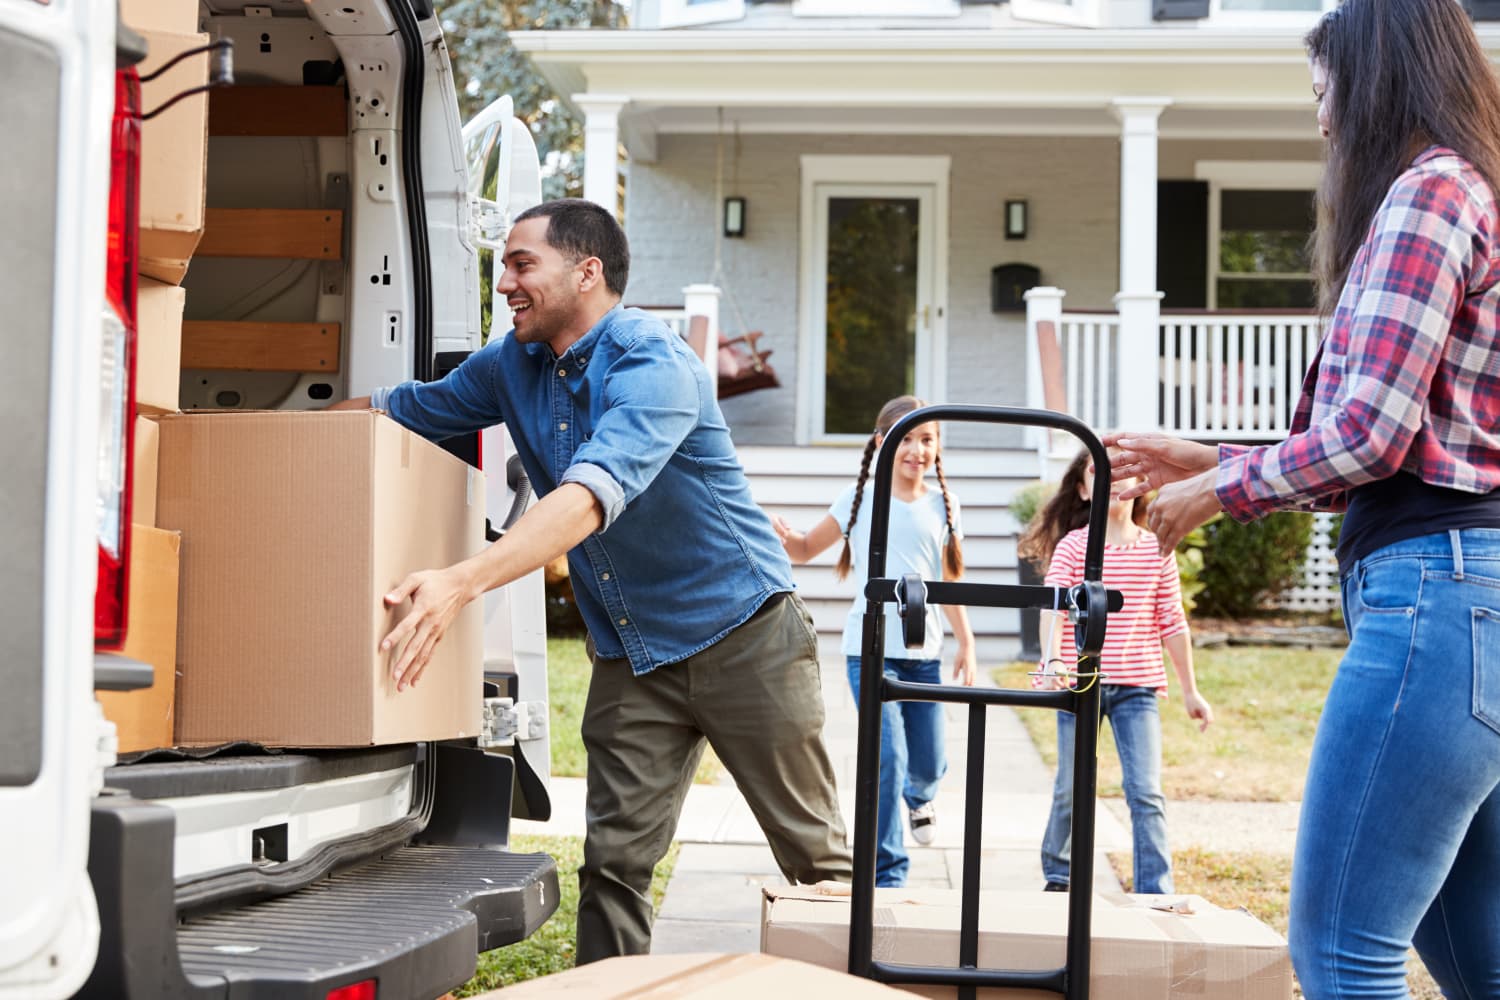 5 Mistakes to Never Make While Moving, According to a Moving Logistics Pro